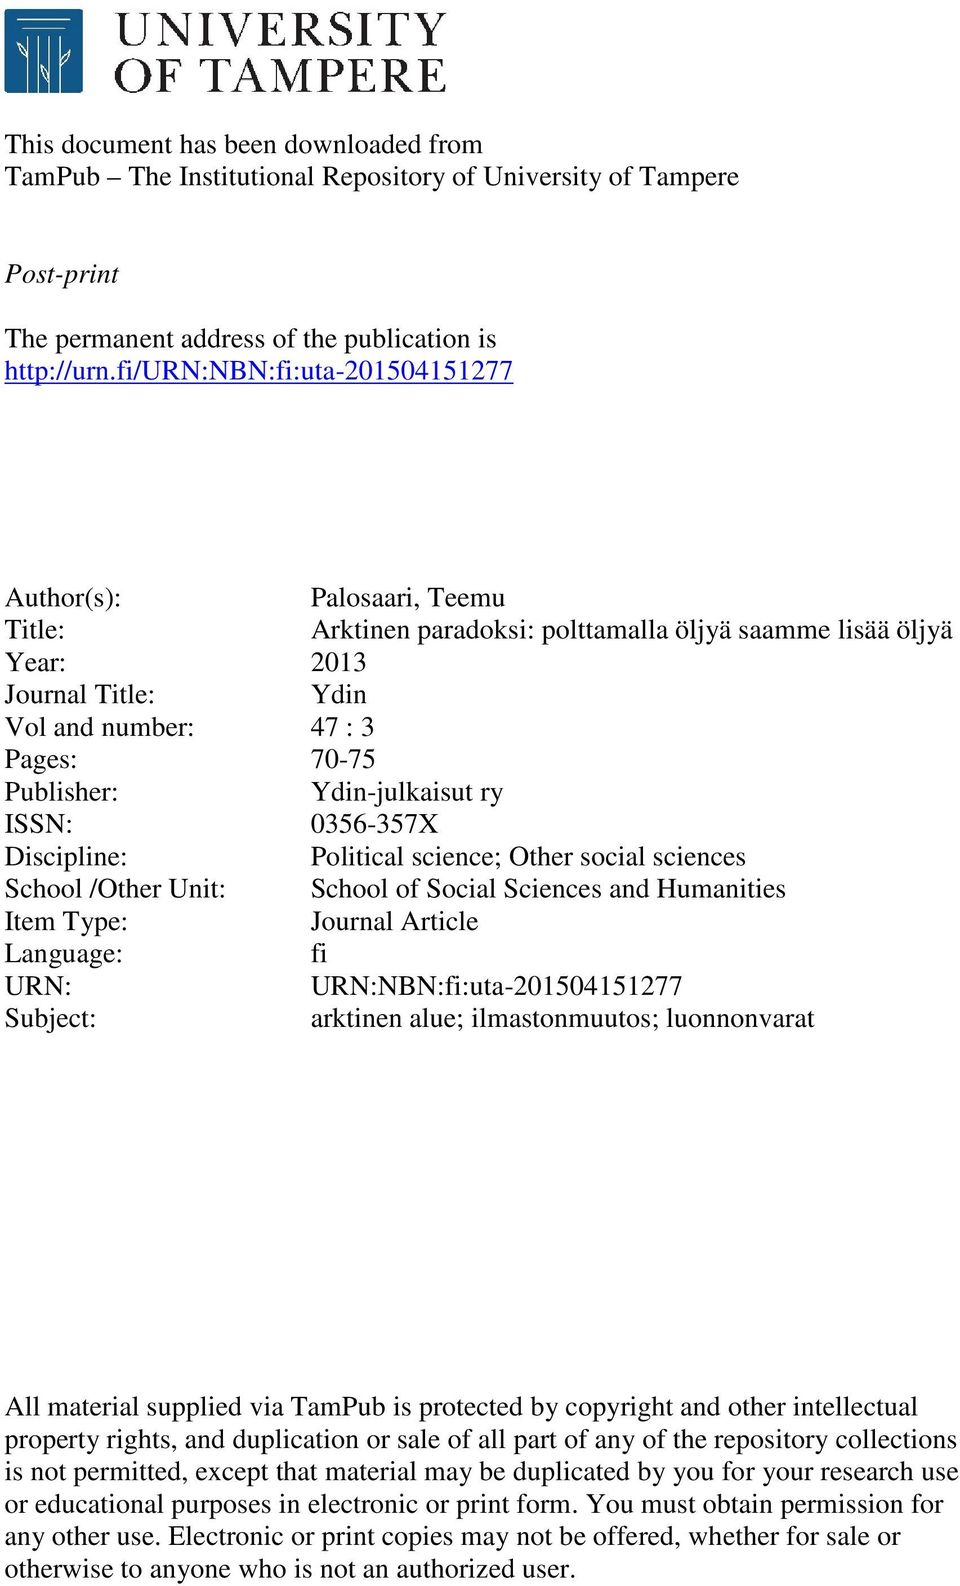 Publisher: Ydin-julkaisut ry ISSN: 0356-357X Discipline: Political science; Other social sciences School /Other Unit: School of Social Sciences and Humanities Item Type: Journal Article Language: fi